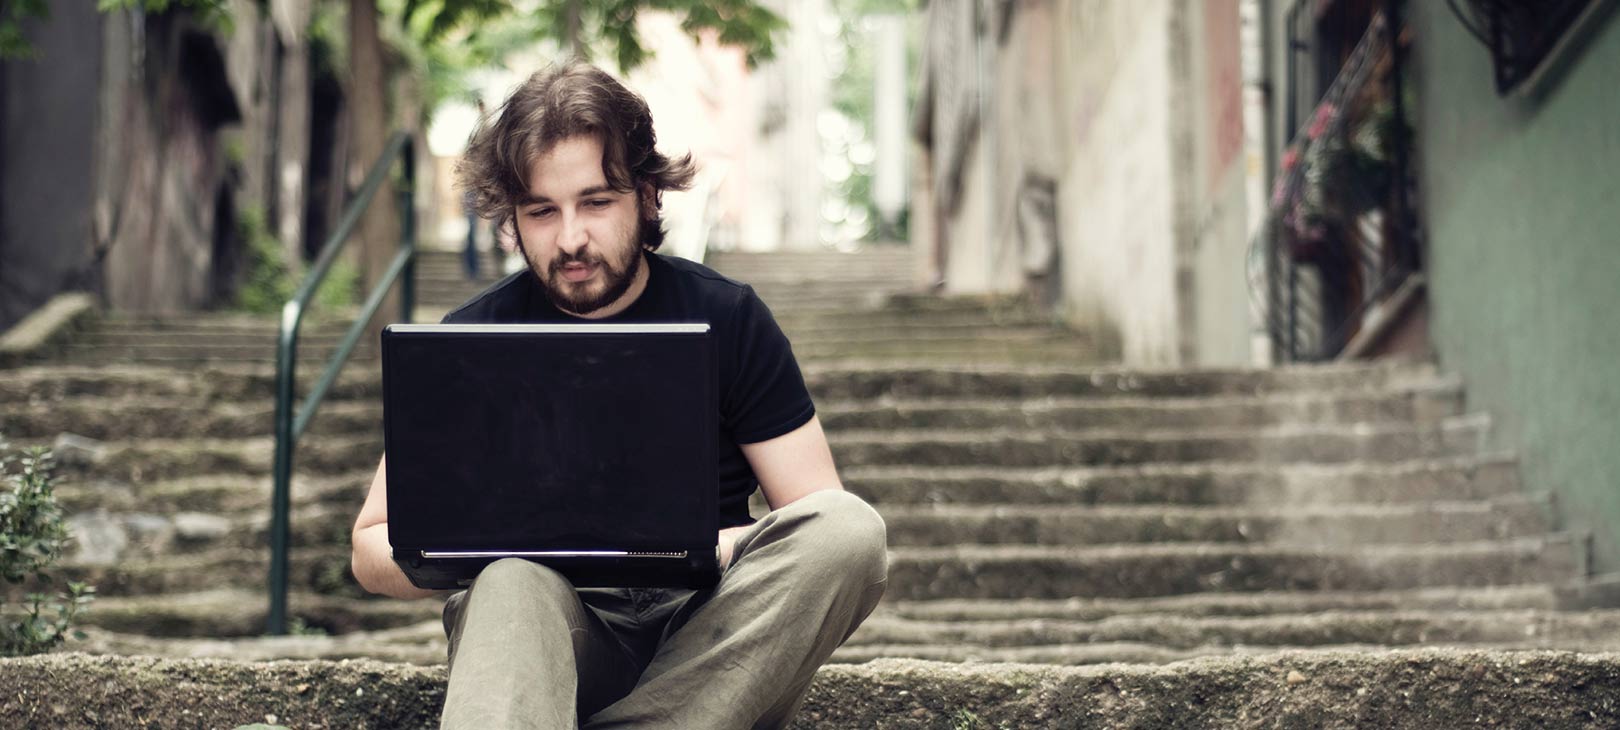 Undergrad Online A male caucasian student sitting on stairs with a laptop.jpg